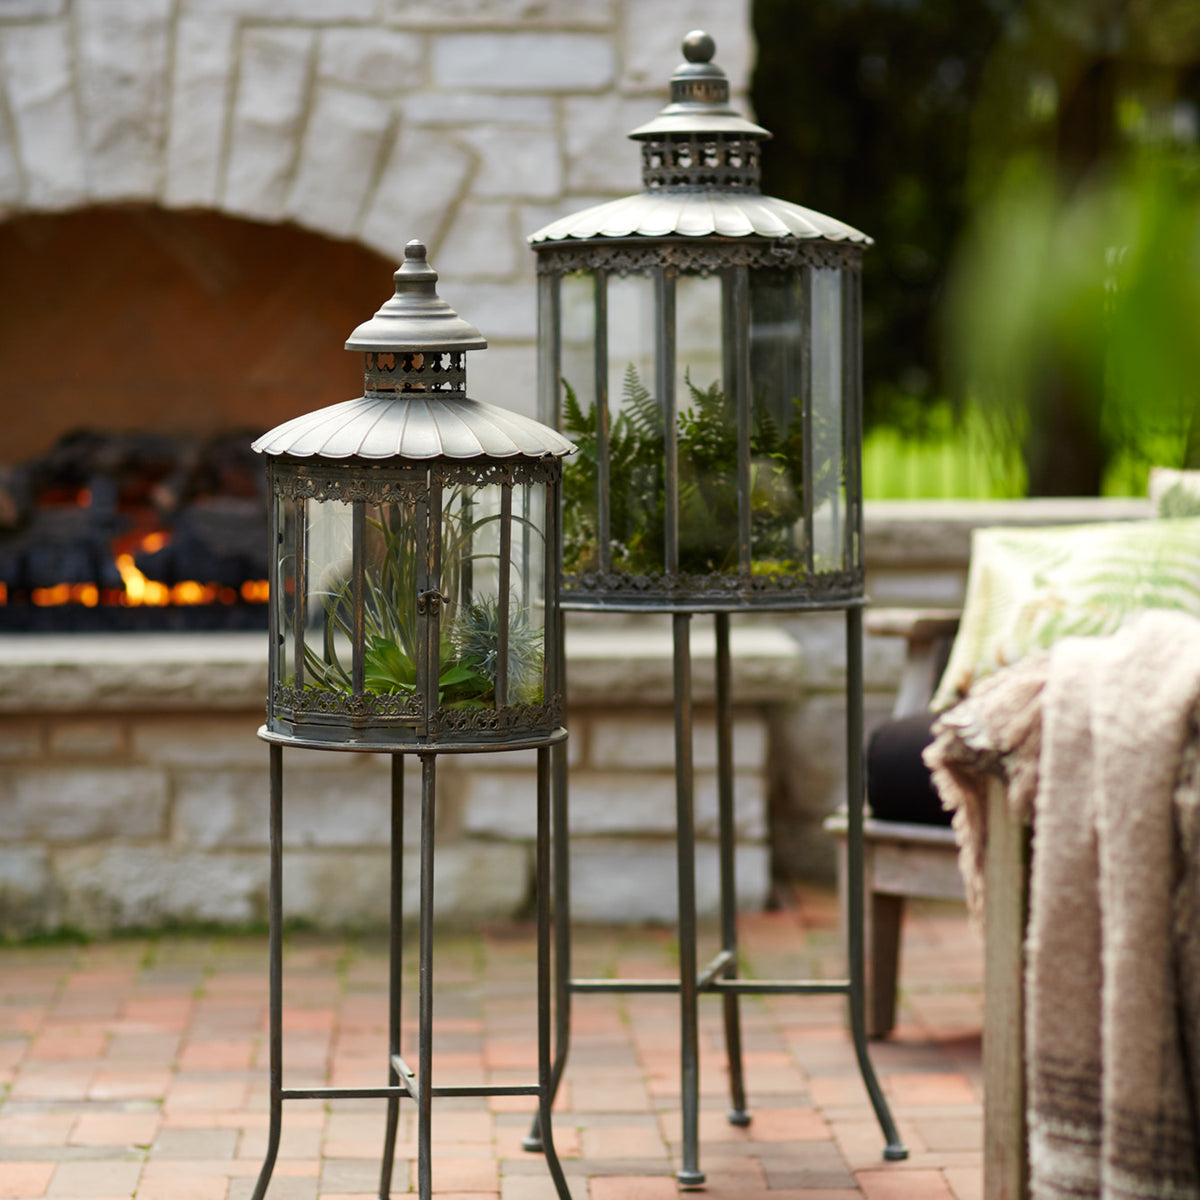 Set of 2 Terrariums or Candle Lanterns on Stands